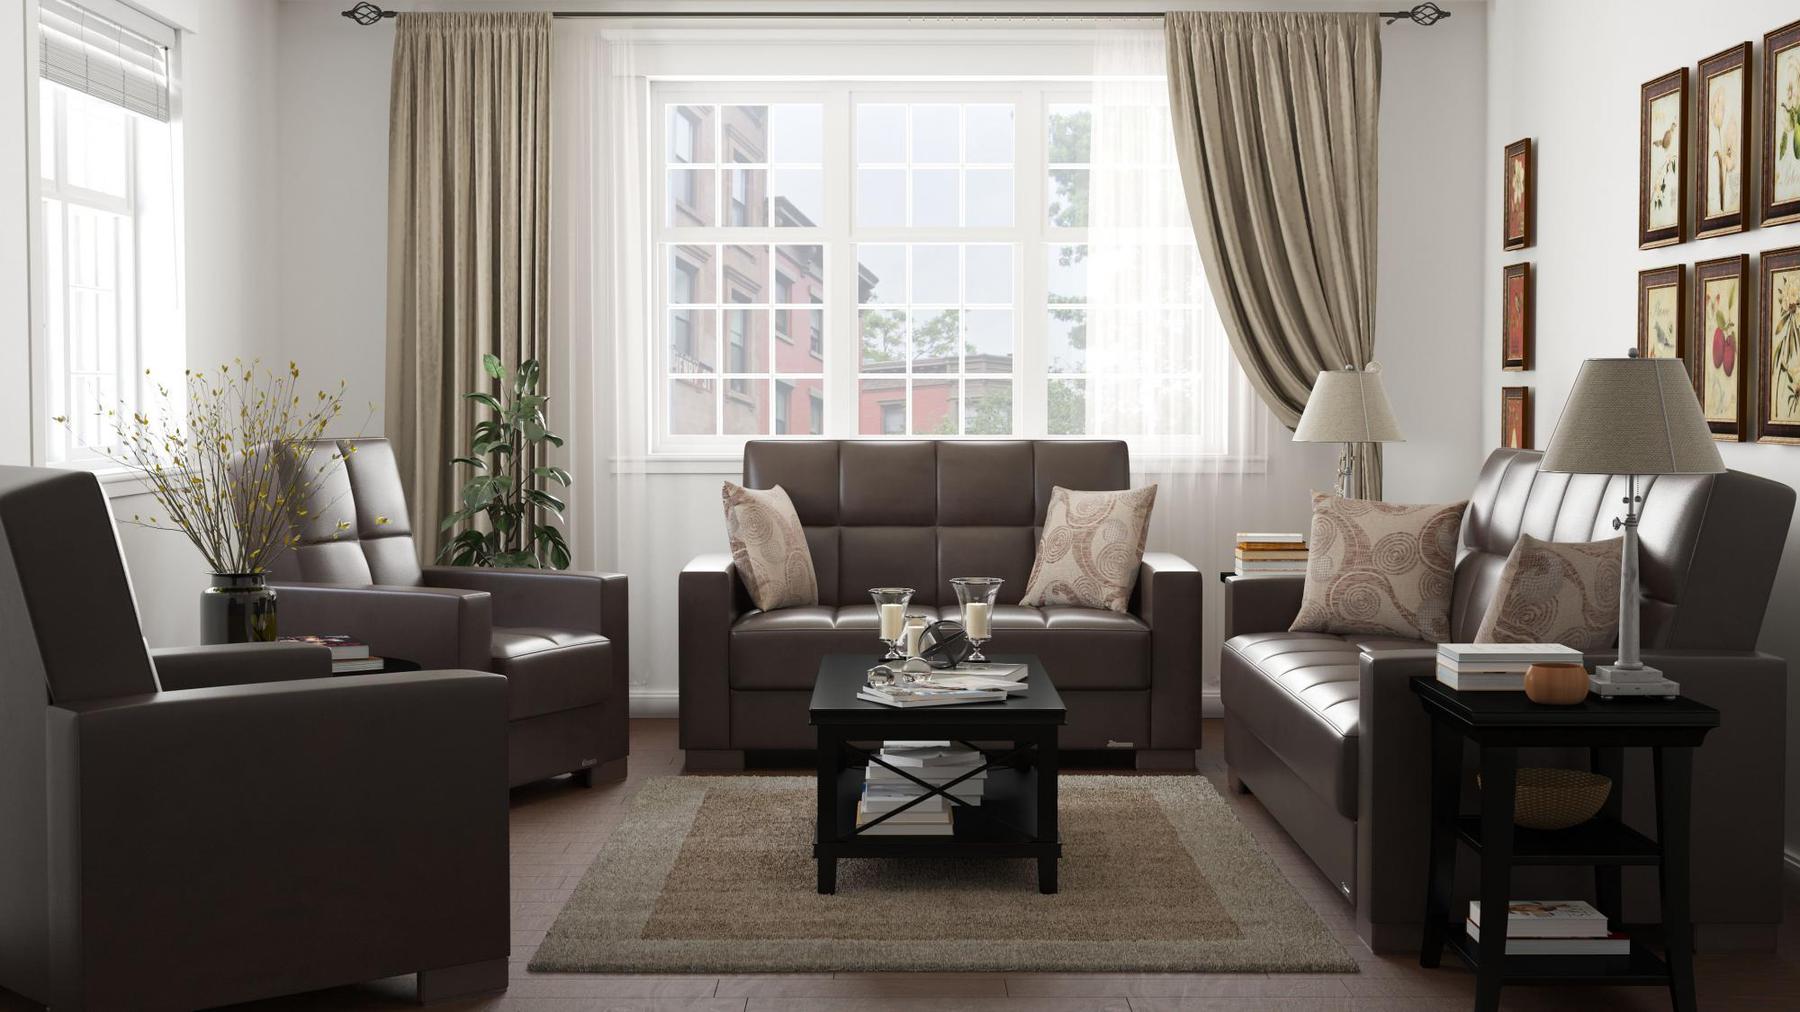 Modern design, Dark Brown , Artificial Leather upholstered convertible sleeper Sofabed with underseat storage from Voyage Track by Ottomanson in living room lifestyle setting with the matching furniture set. This Sofabed measures 90 inches width by 36 inches depth by 41 inches height.